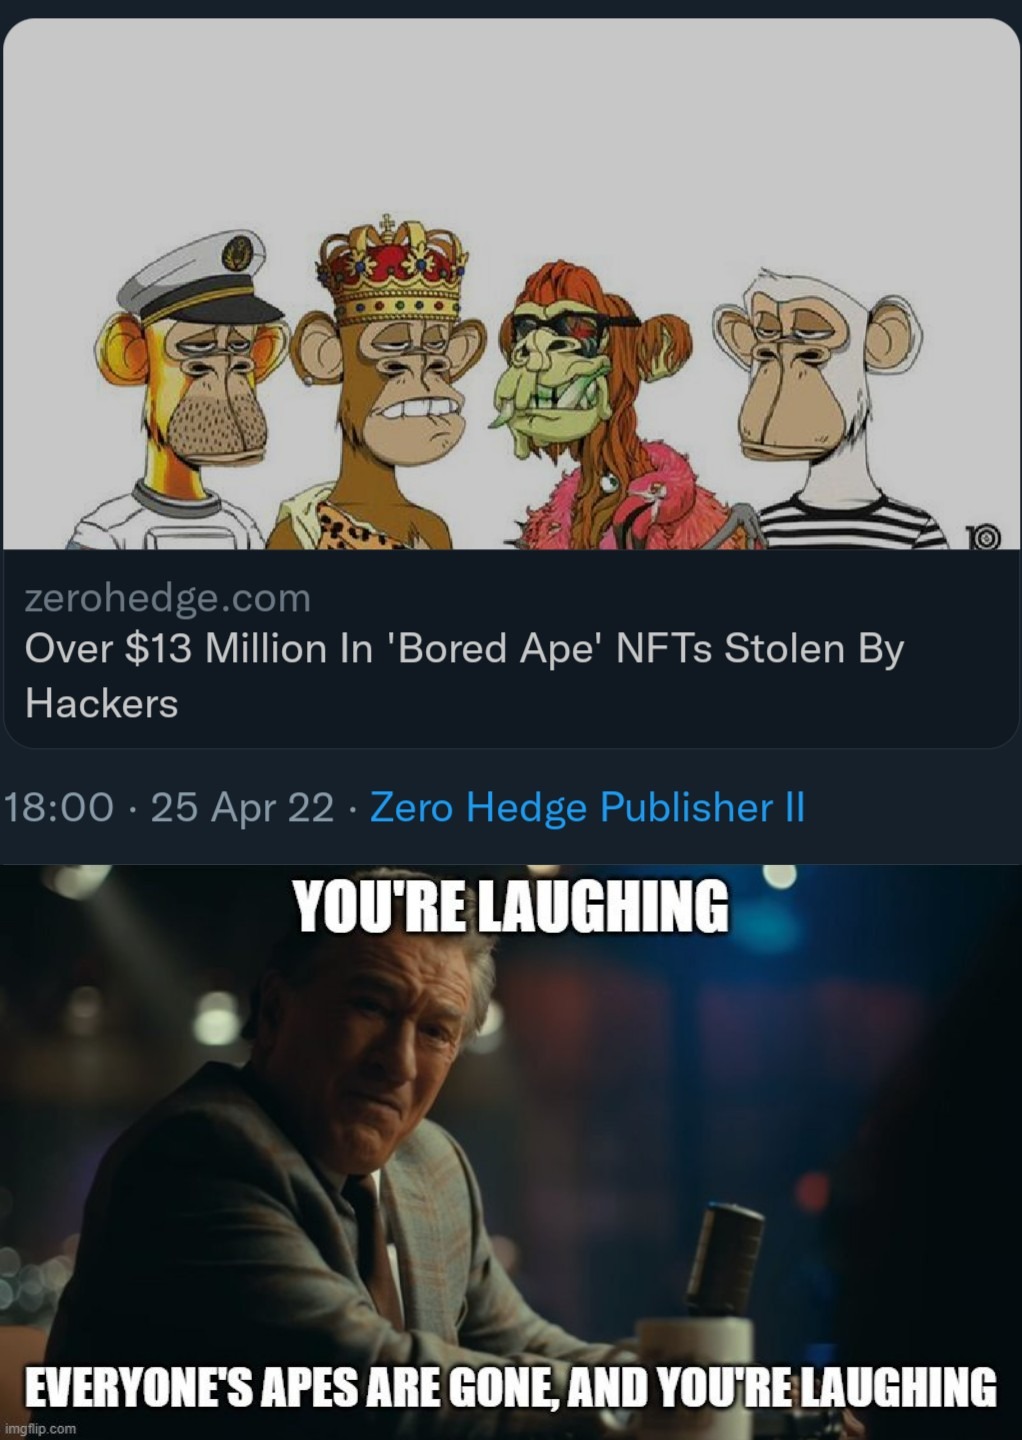 Actually, exactly $0 in NFTs were stolen - meme